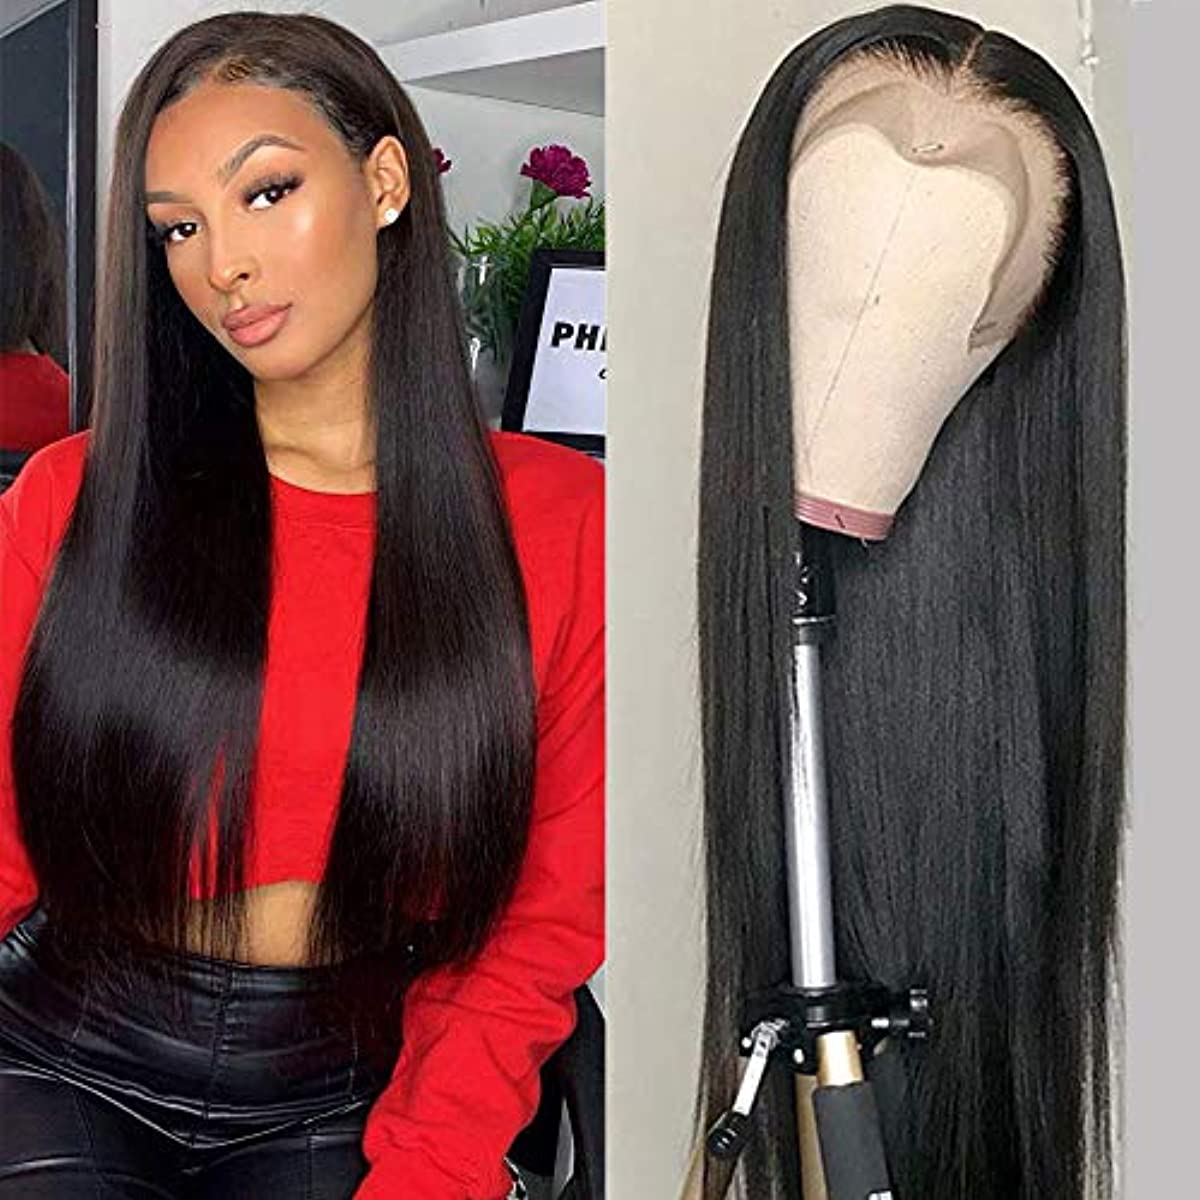 Lace Front Wigs Human Hair 24 inch Straight Lace Frontal Wigs For Black Woman 13x4 Lace Front Wigs Pre Plucked Hairline with Baby Hair 150{3ce9dc9f7e831427937bcc05bd5c36e3157a214b7a1ec5c234e105ad24840a77} Density 10A Dyale Natural Black Hair Wig(24 inch)